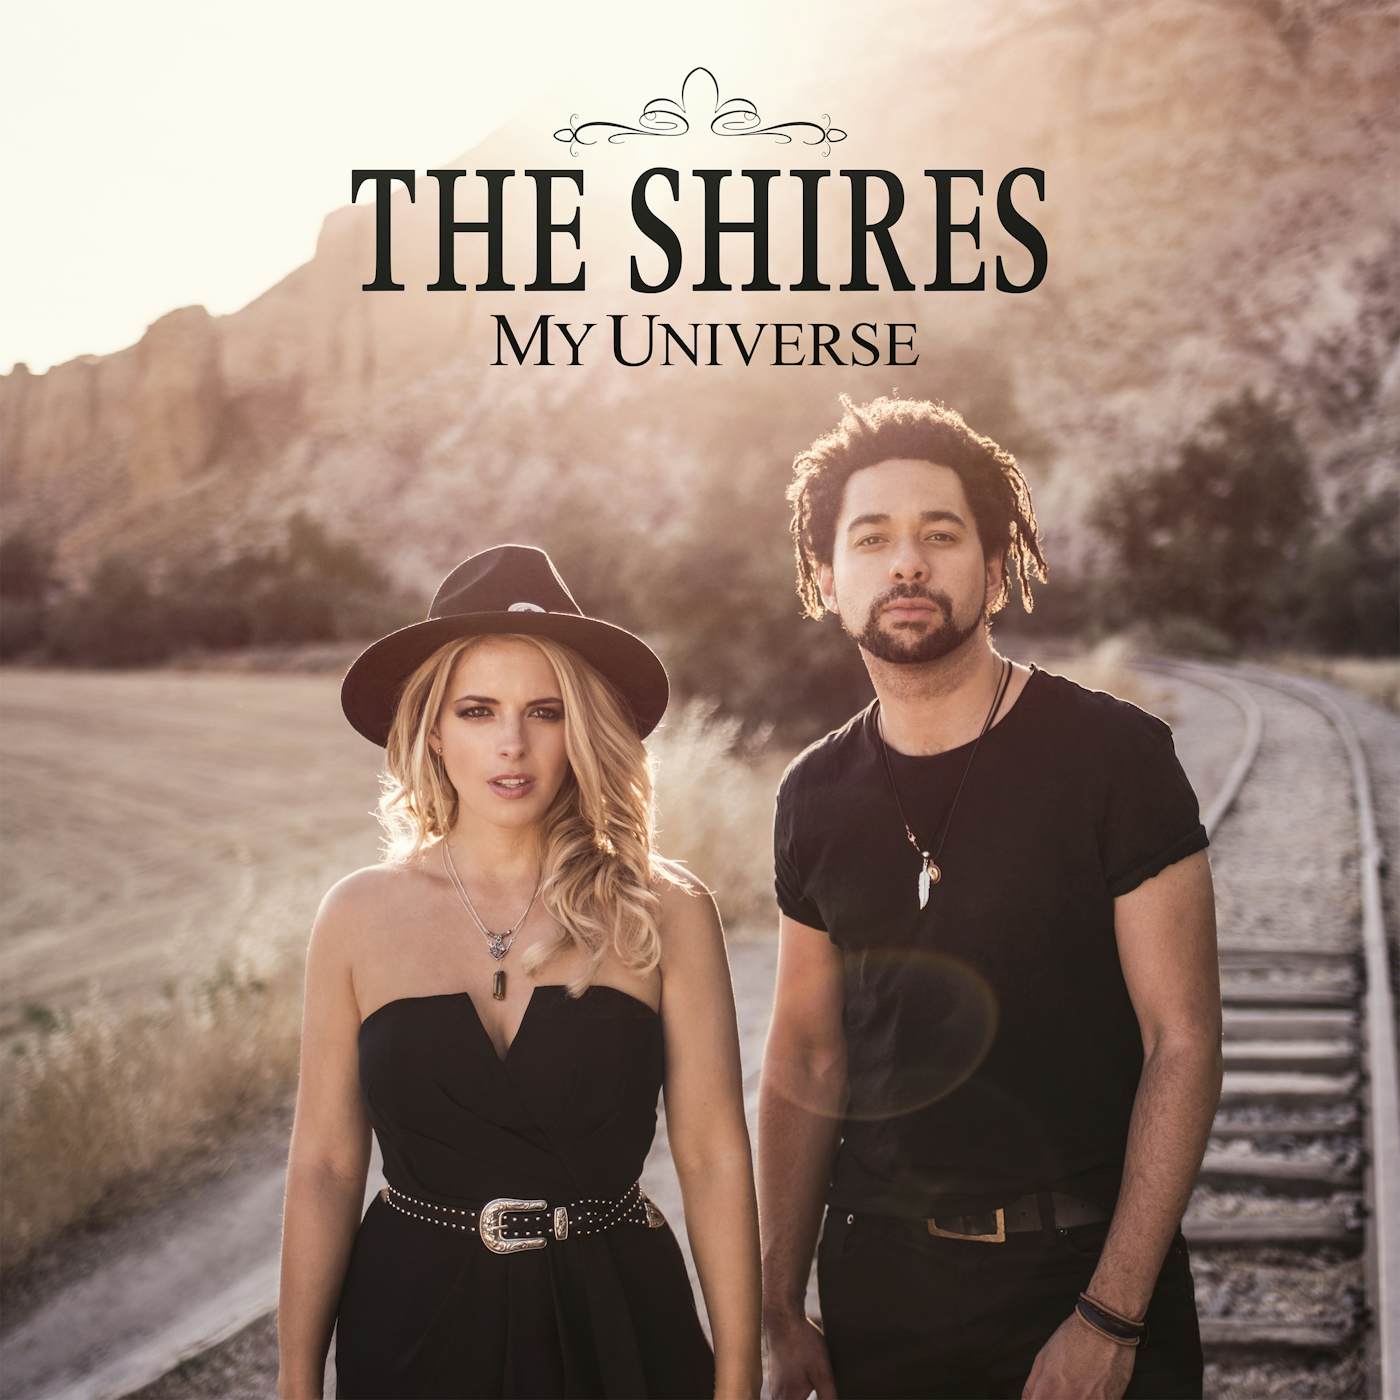 The Shires My Universe Vinyl Record